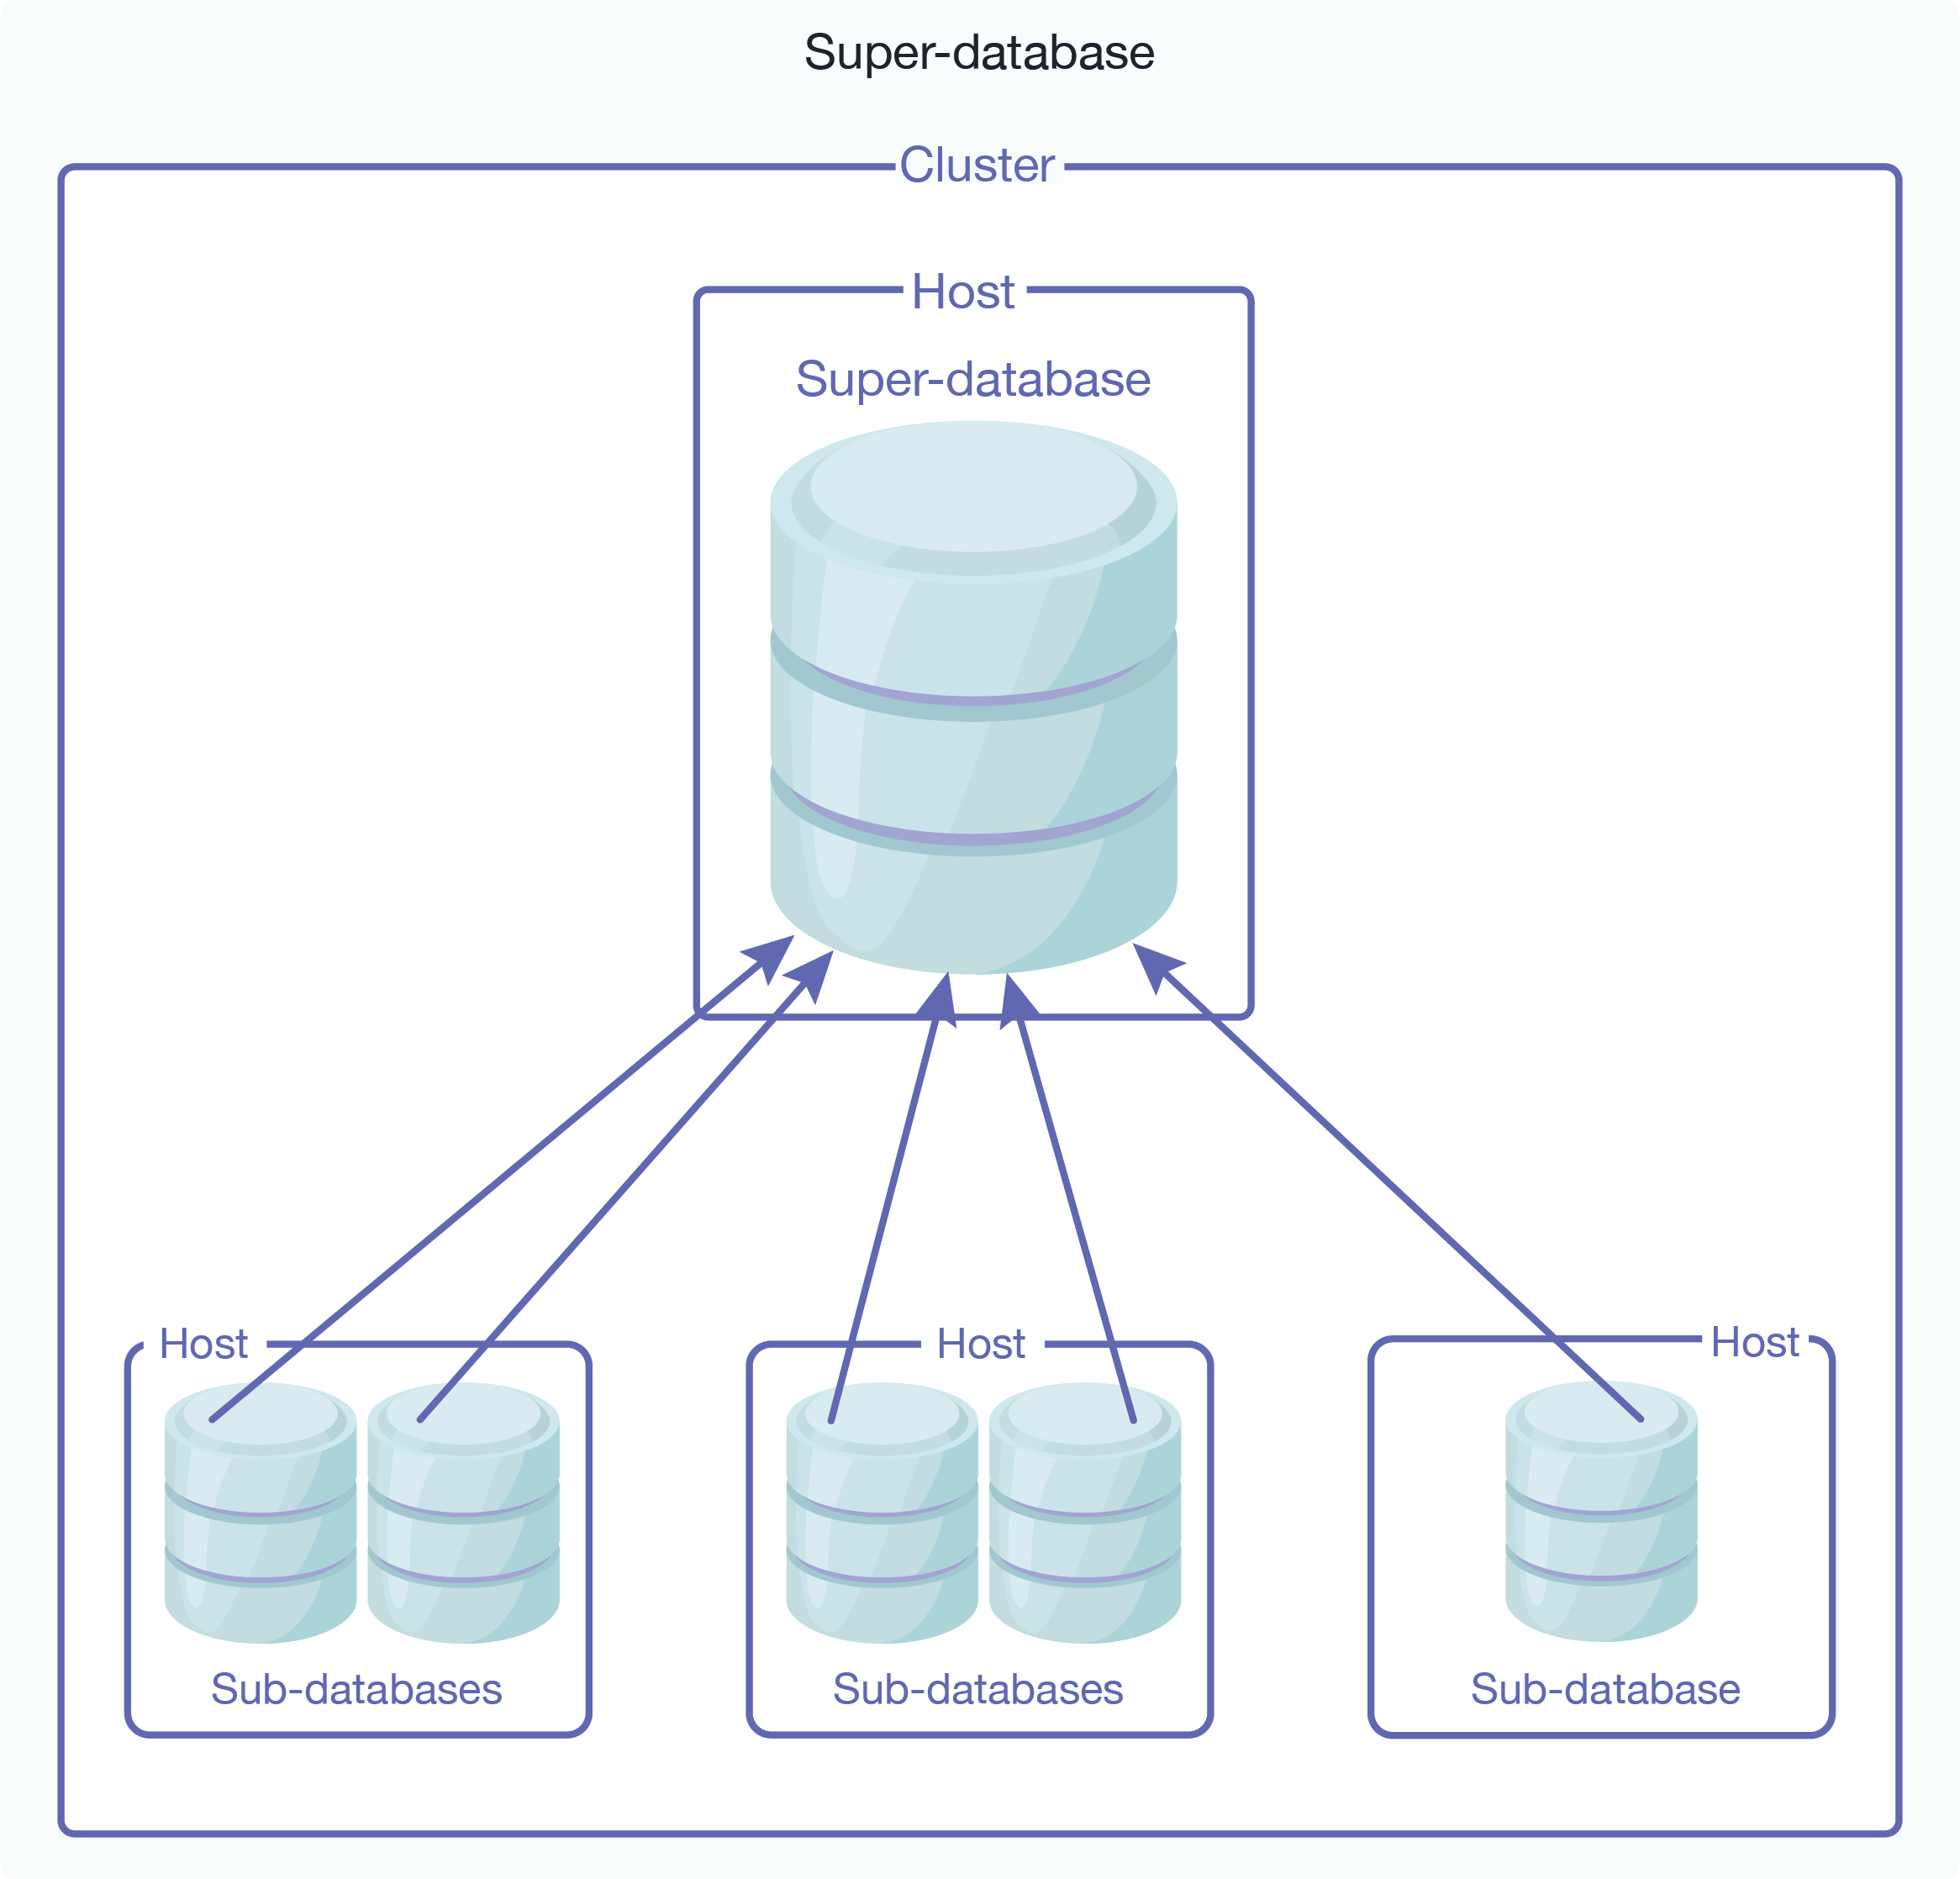 Illustration of a super-database and its sub-databases configured on a single cluster.